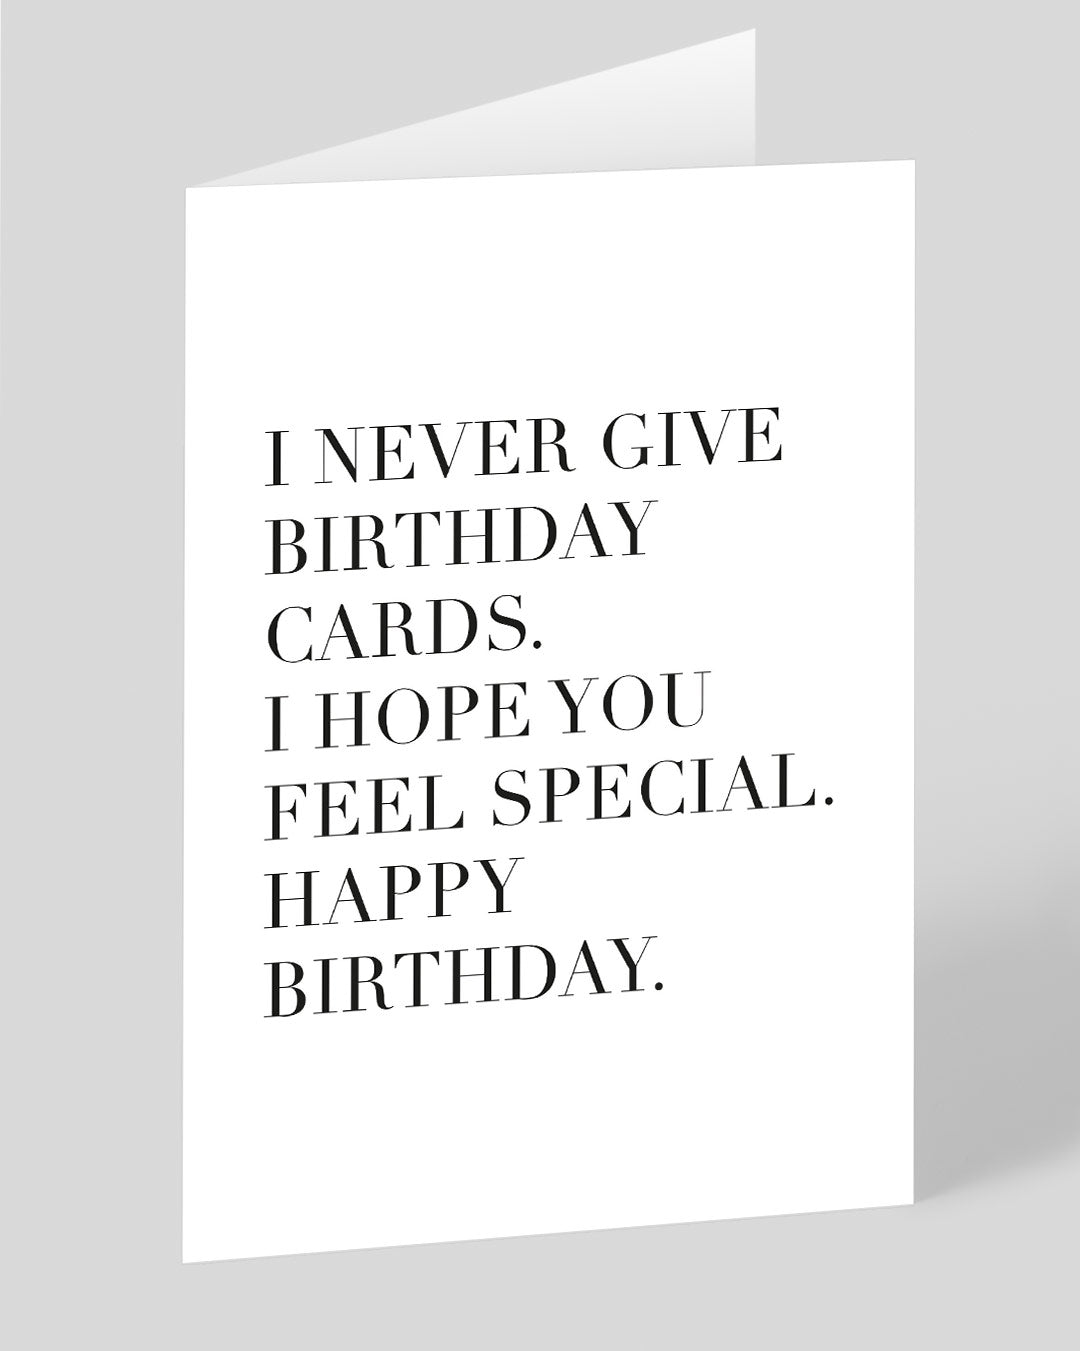 Never Give Cards Birthday Card